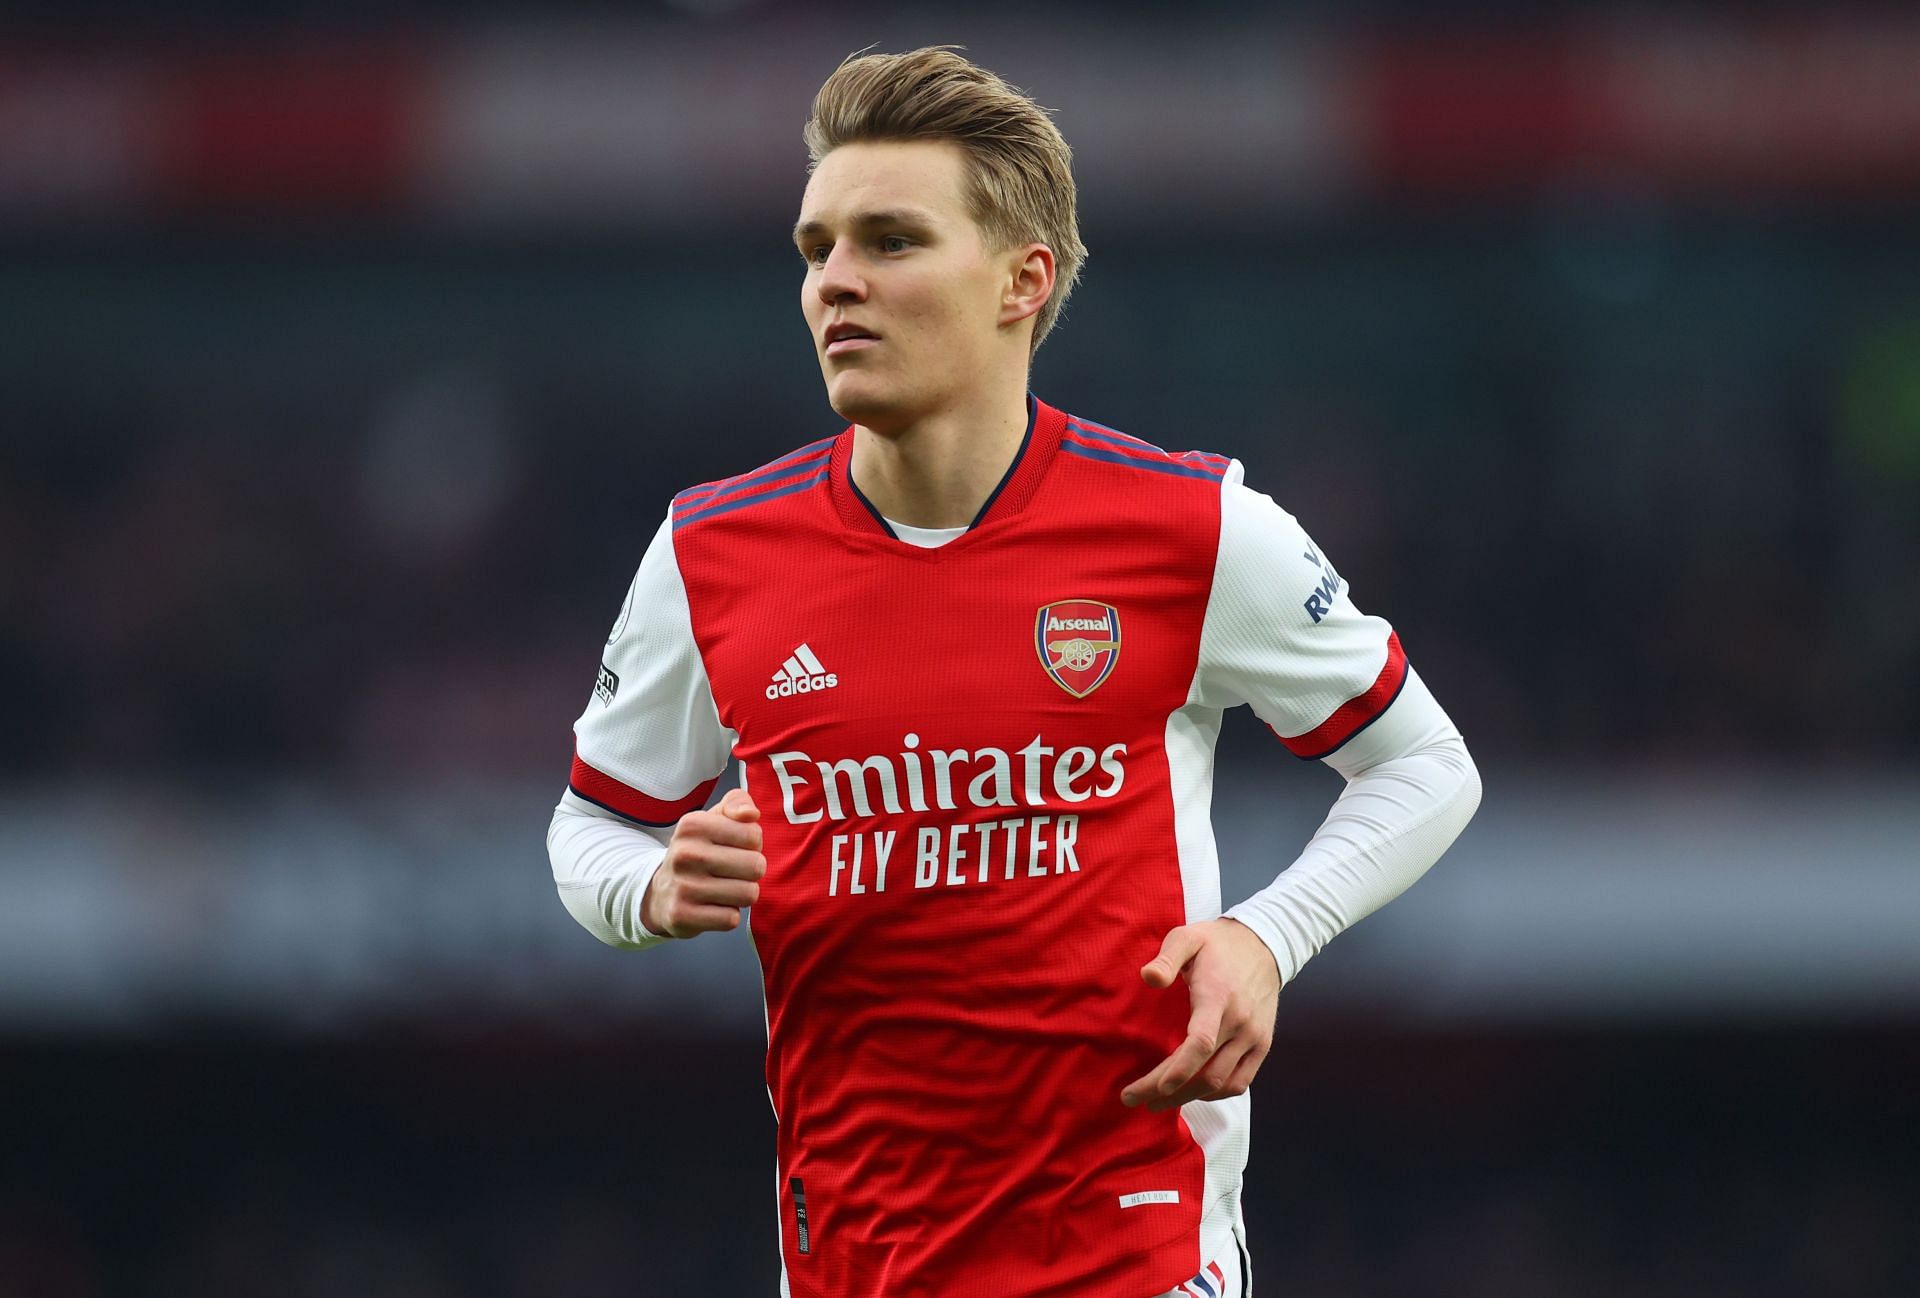 Martin Odegaard has a bright future at the Gunners.